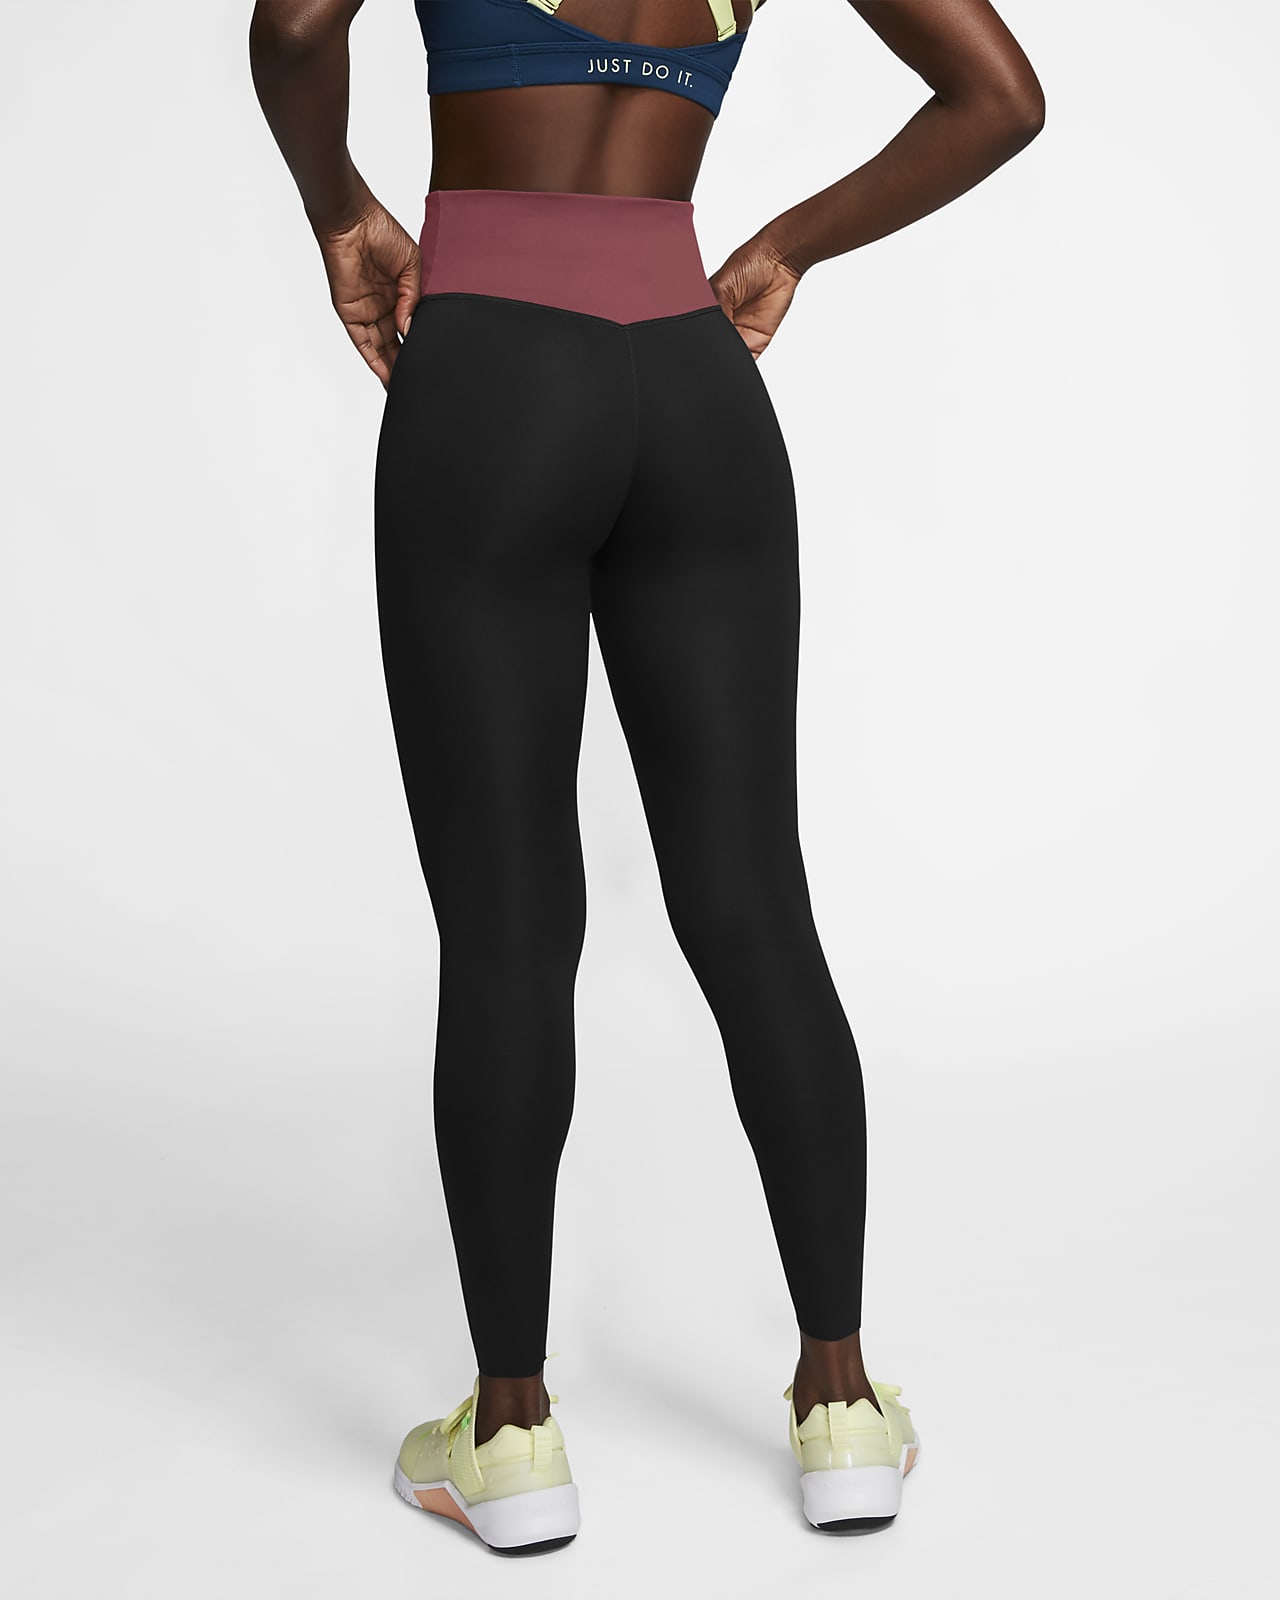 Buy > the nike one tight fit mid rise leggings > in stock